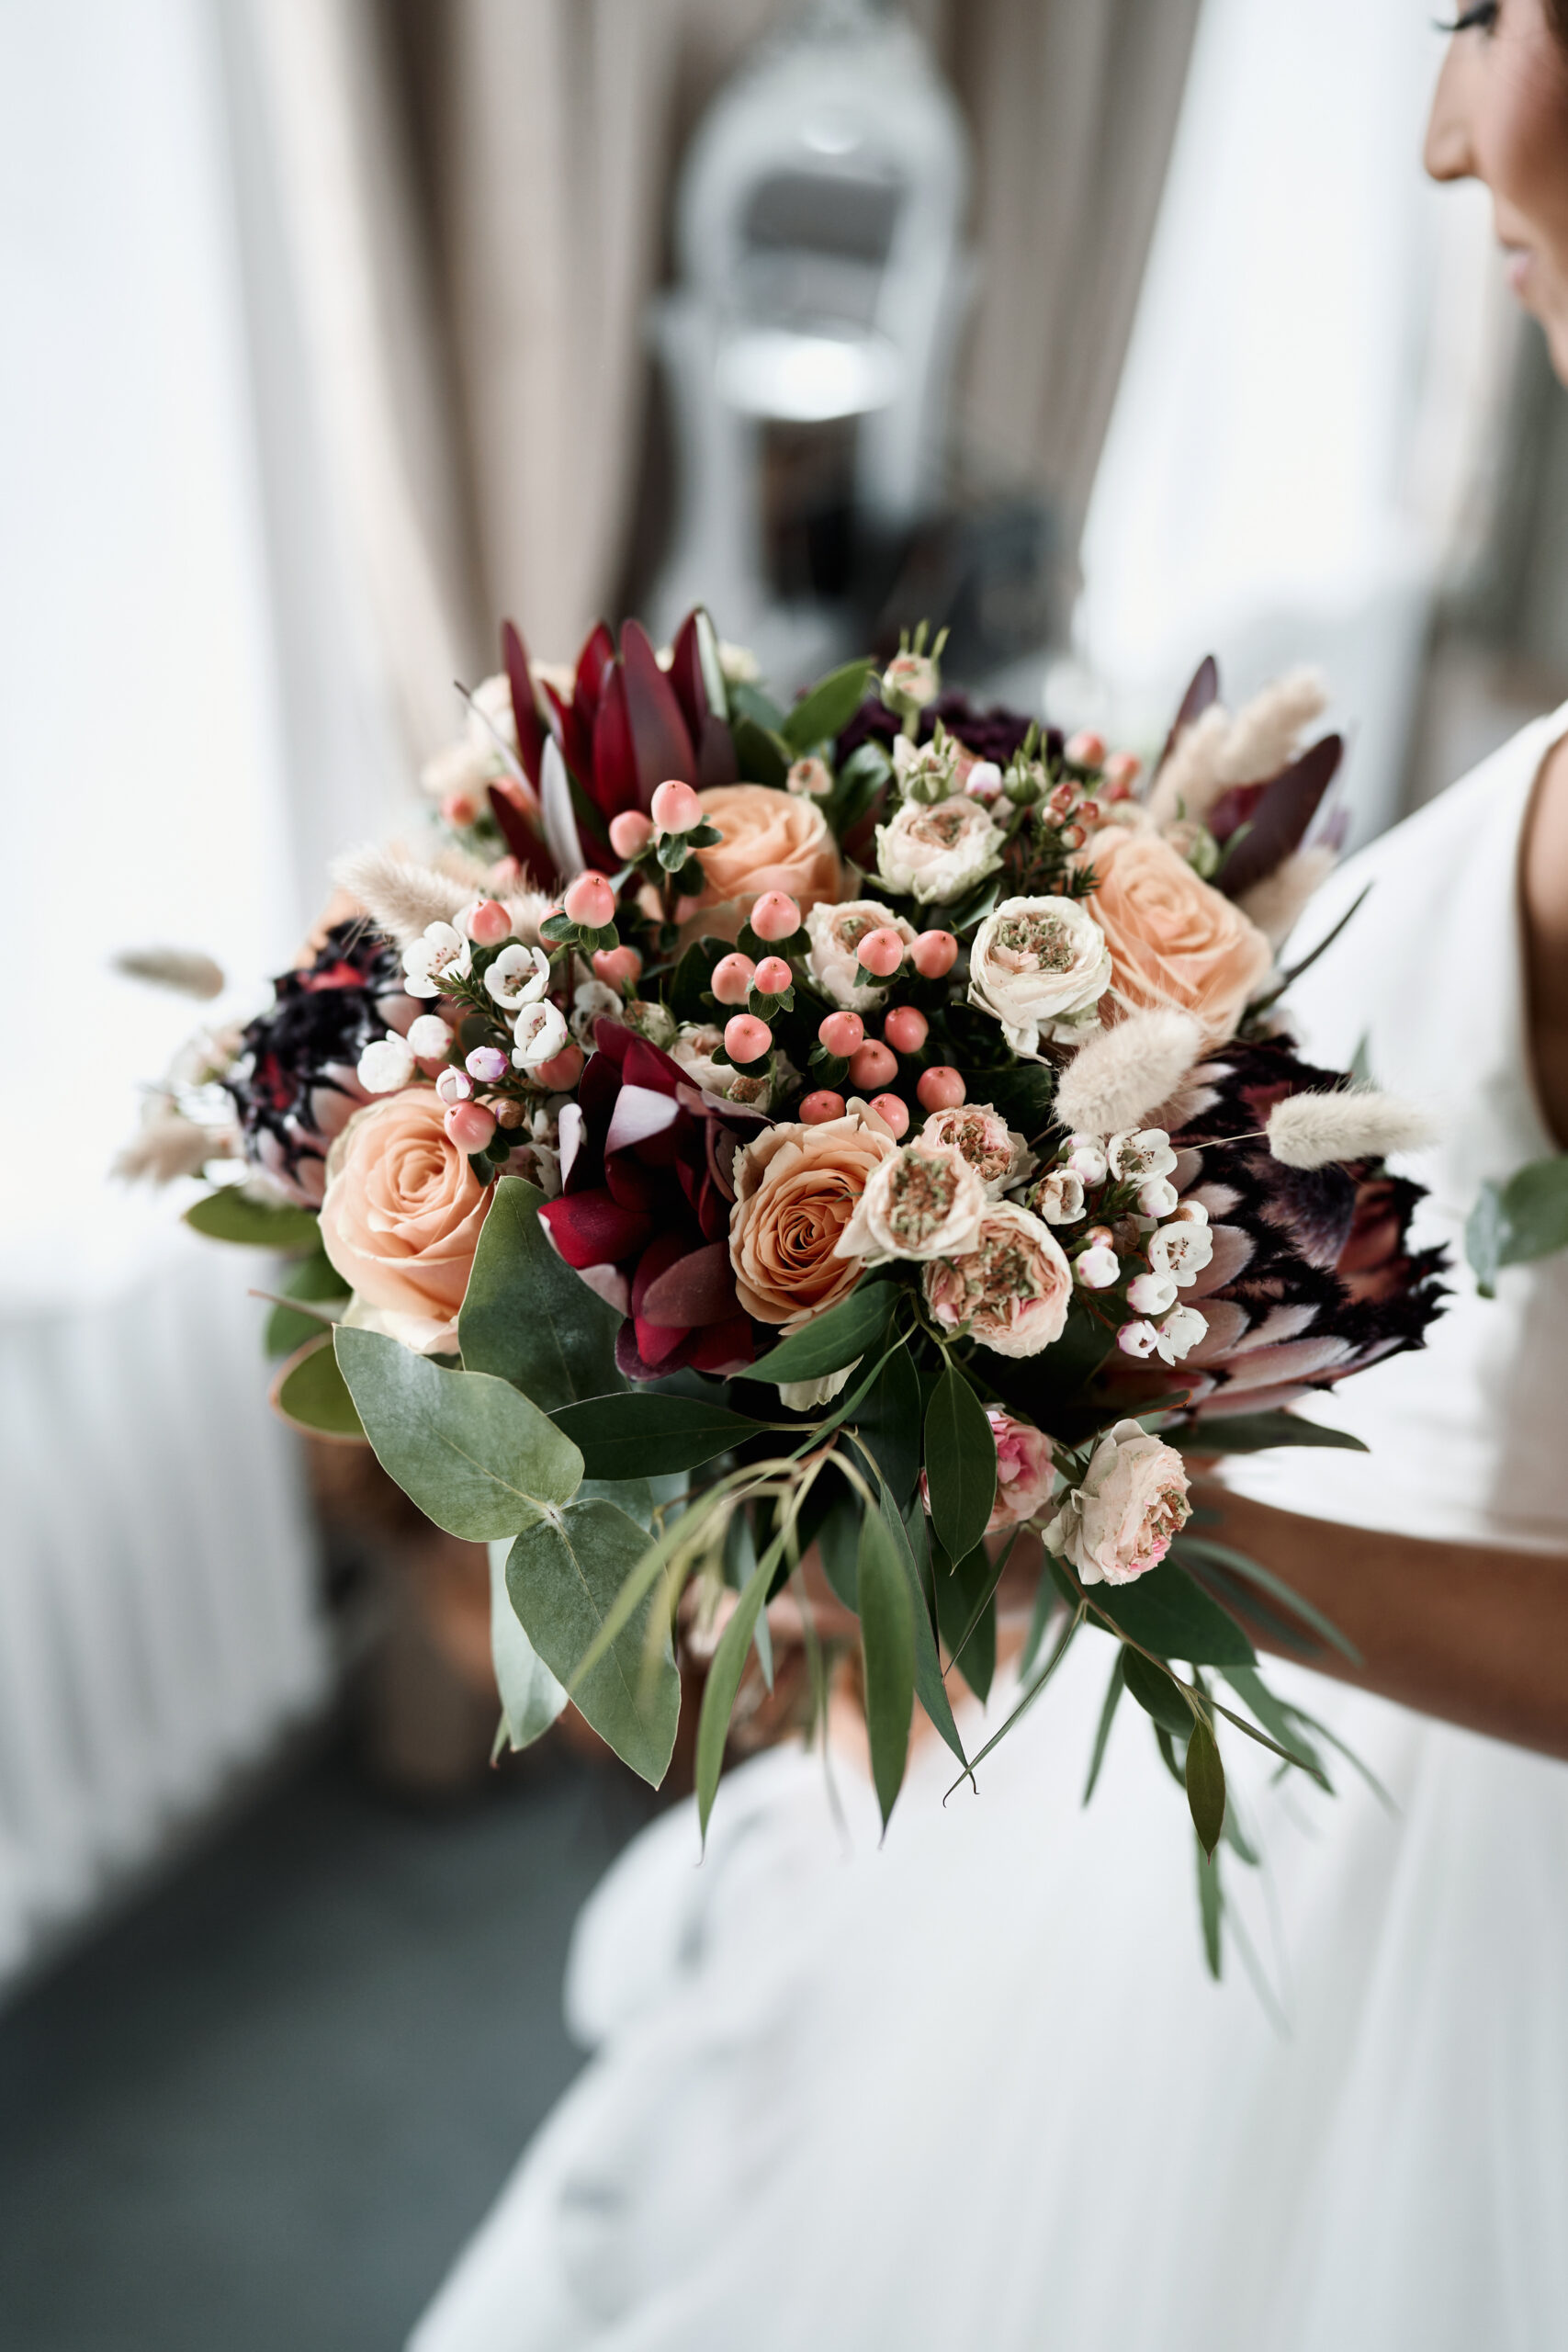 A woman getting married holding a bunch of flowers.